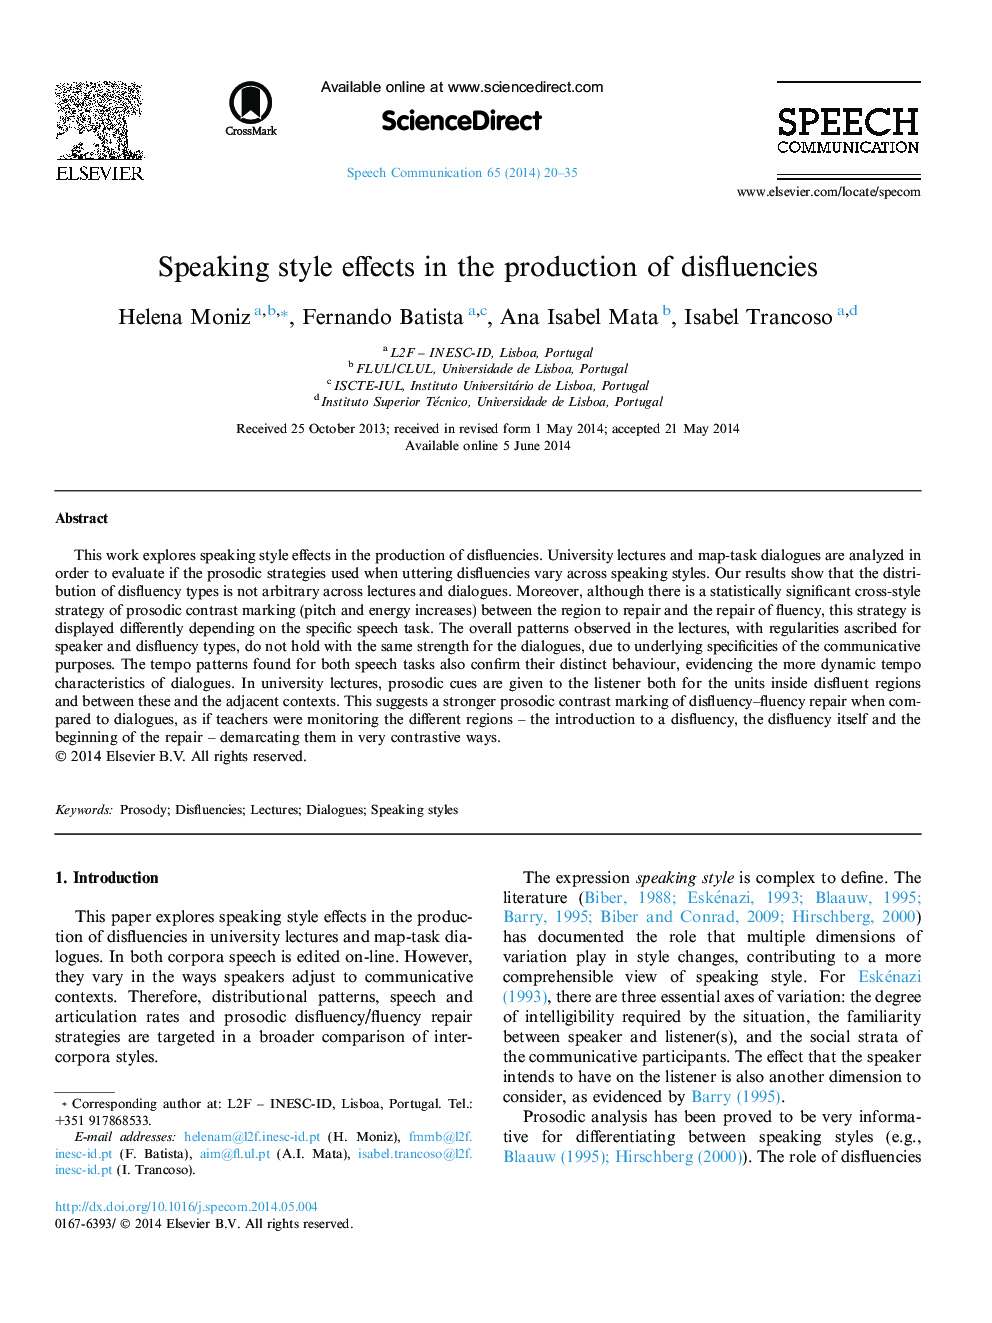 Speaking style effects in the production of disfluencies